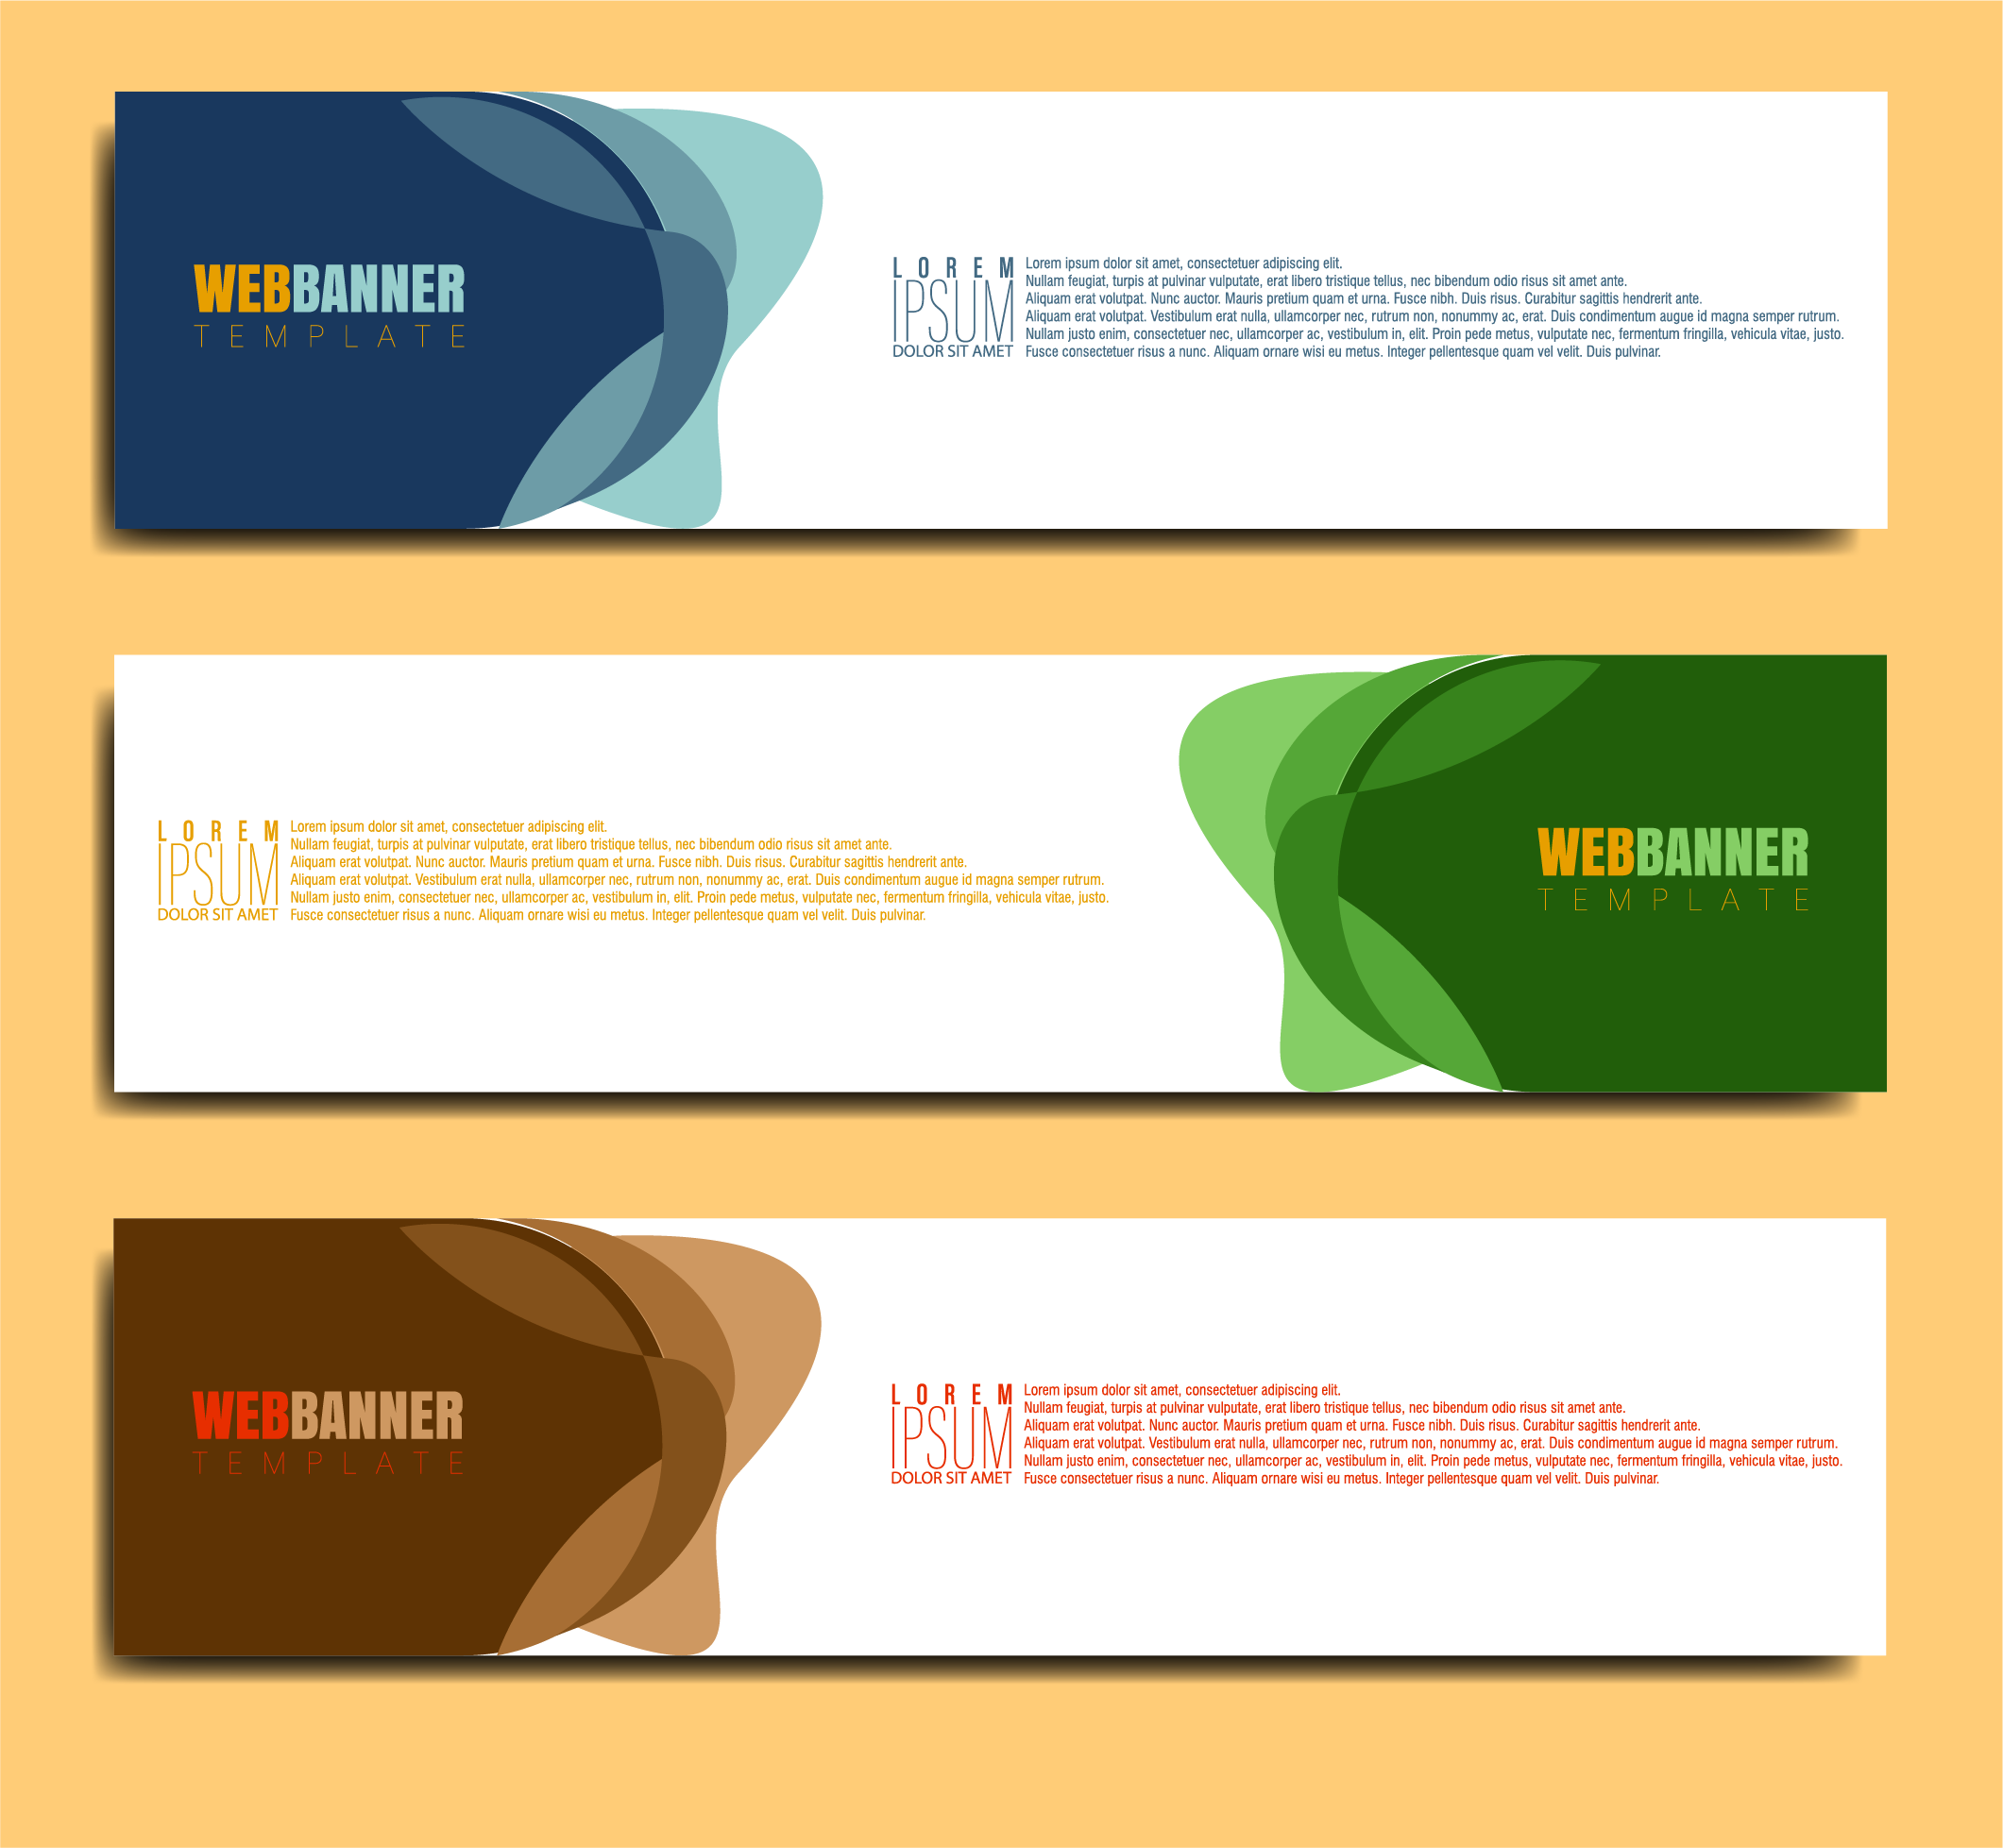 abstract banner  template  Download  Free  Vectors  Clipart 